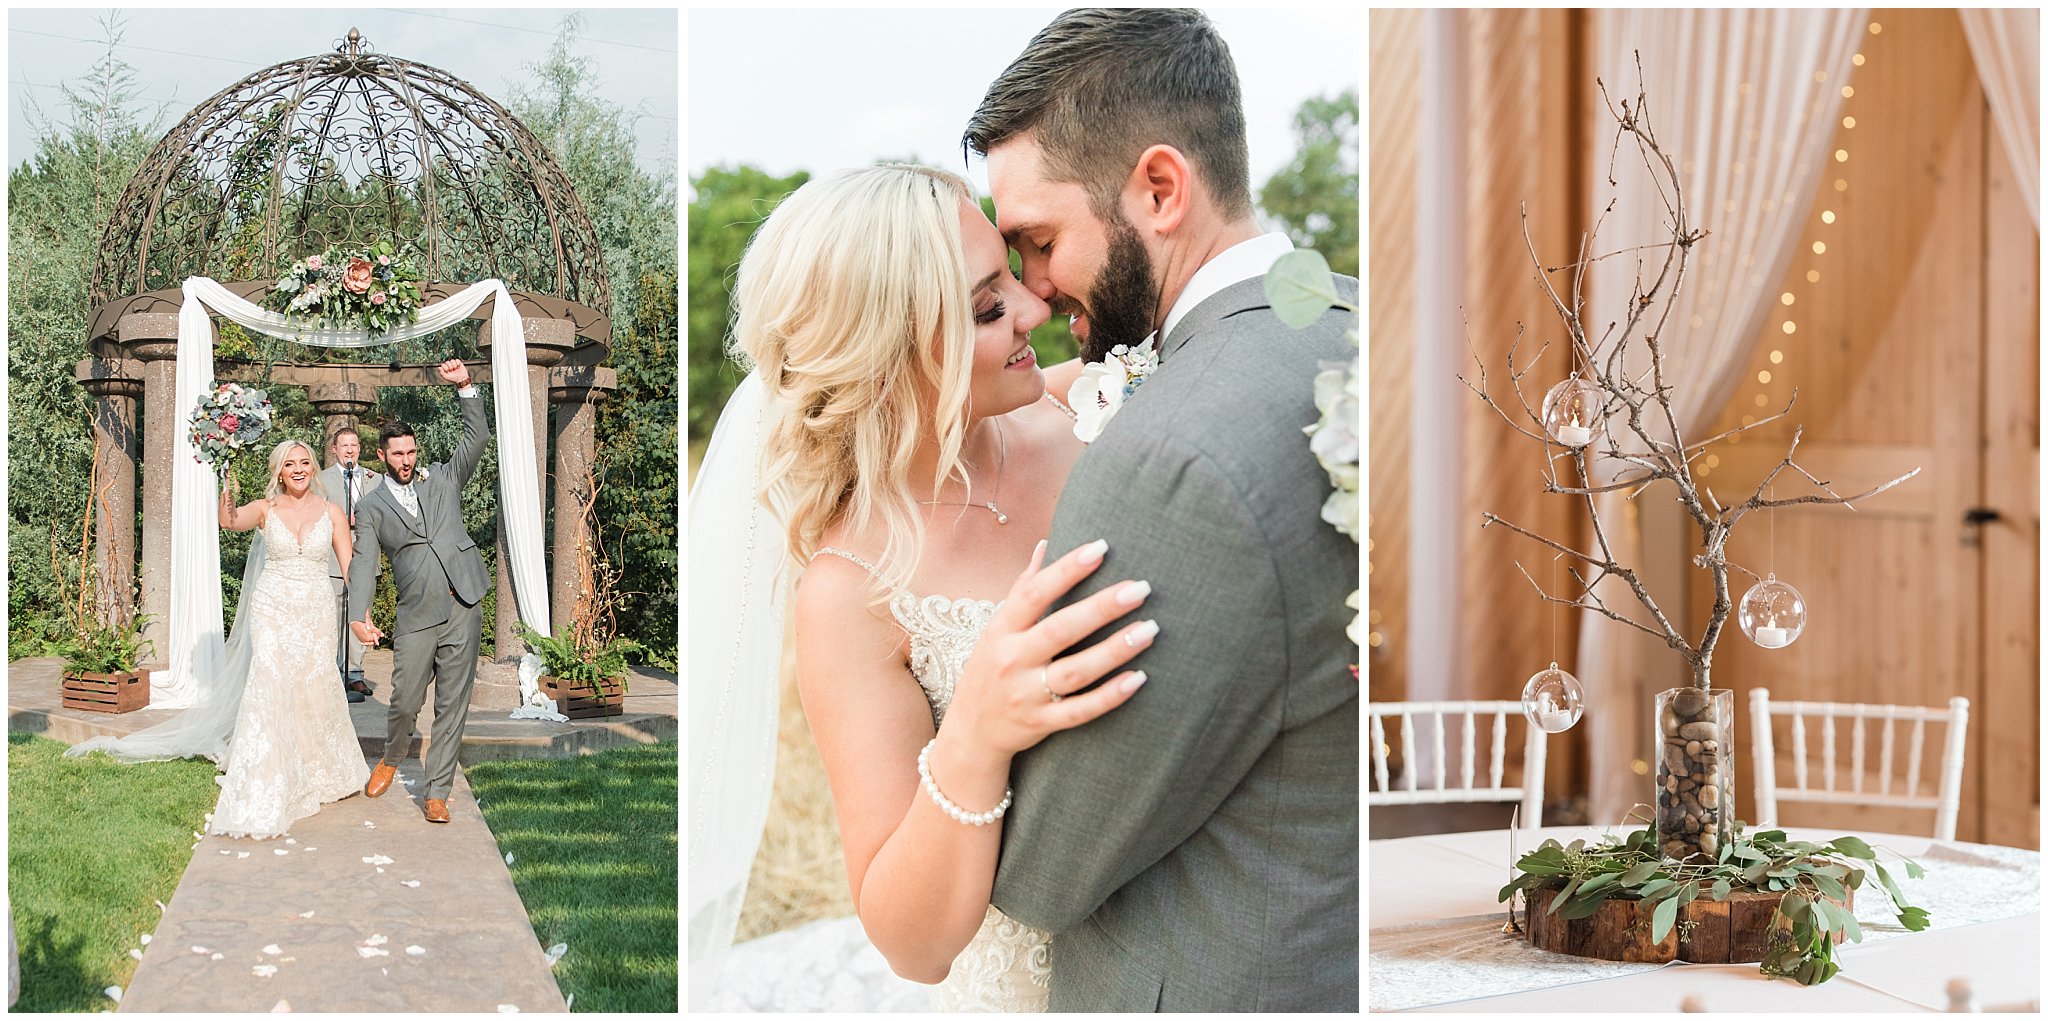 Dusty Blue and Rose Summer Wedding at Oak Hills Utah | Jessie and Dallin Photography